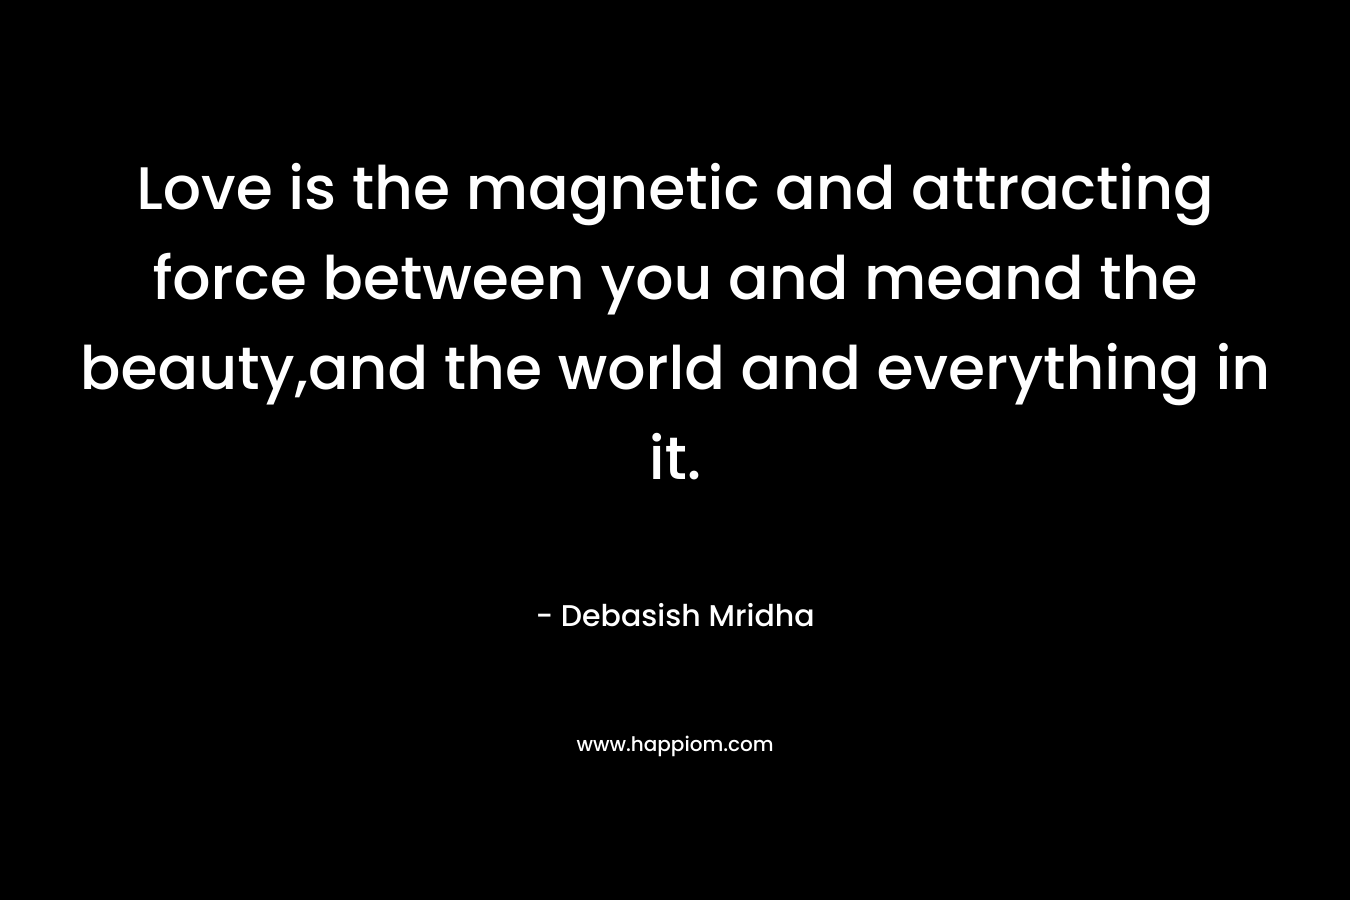 Love is the magnetic and attracting force between you and meand the beauty,and the world and everything in it. – Debasish Mridha